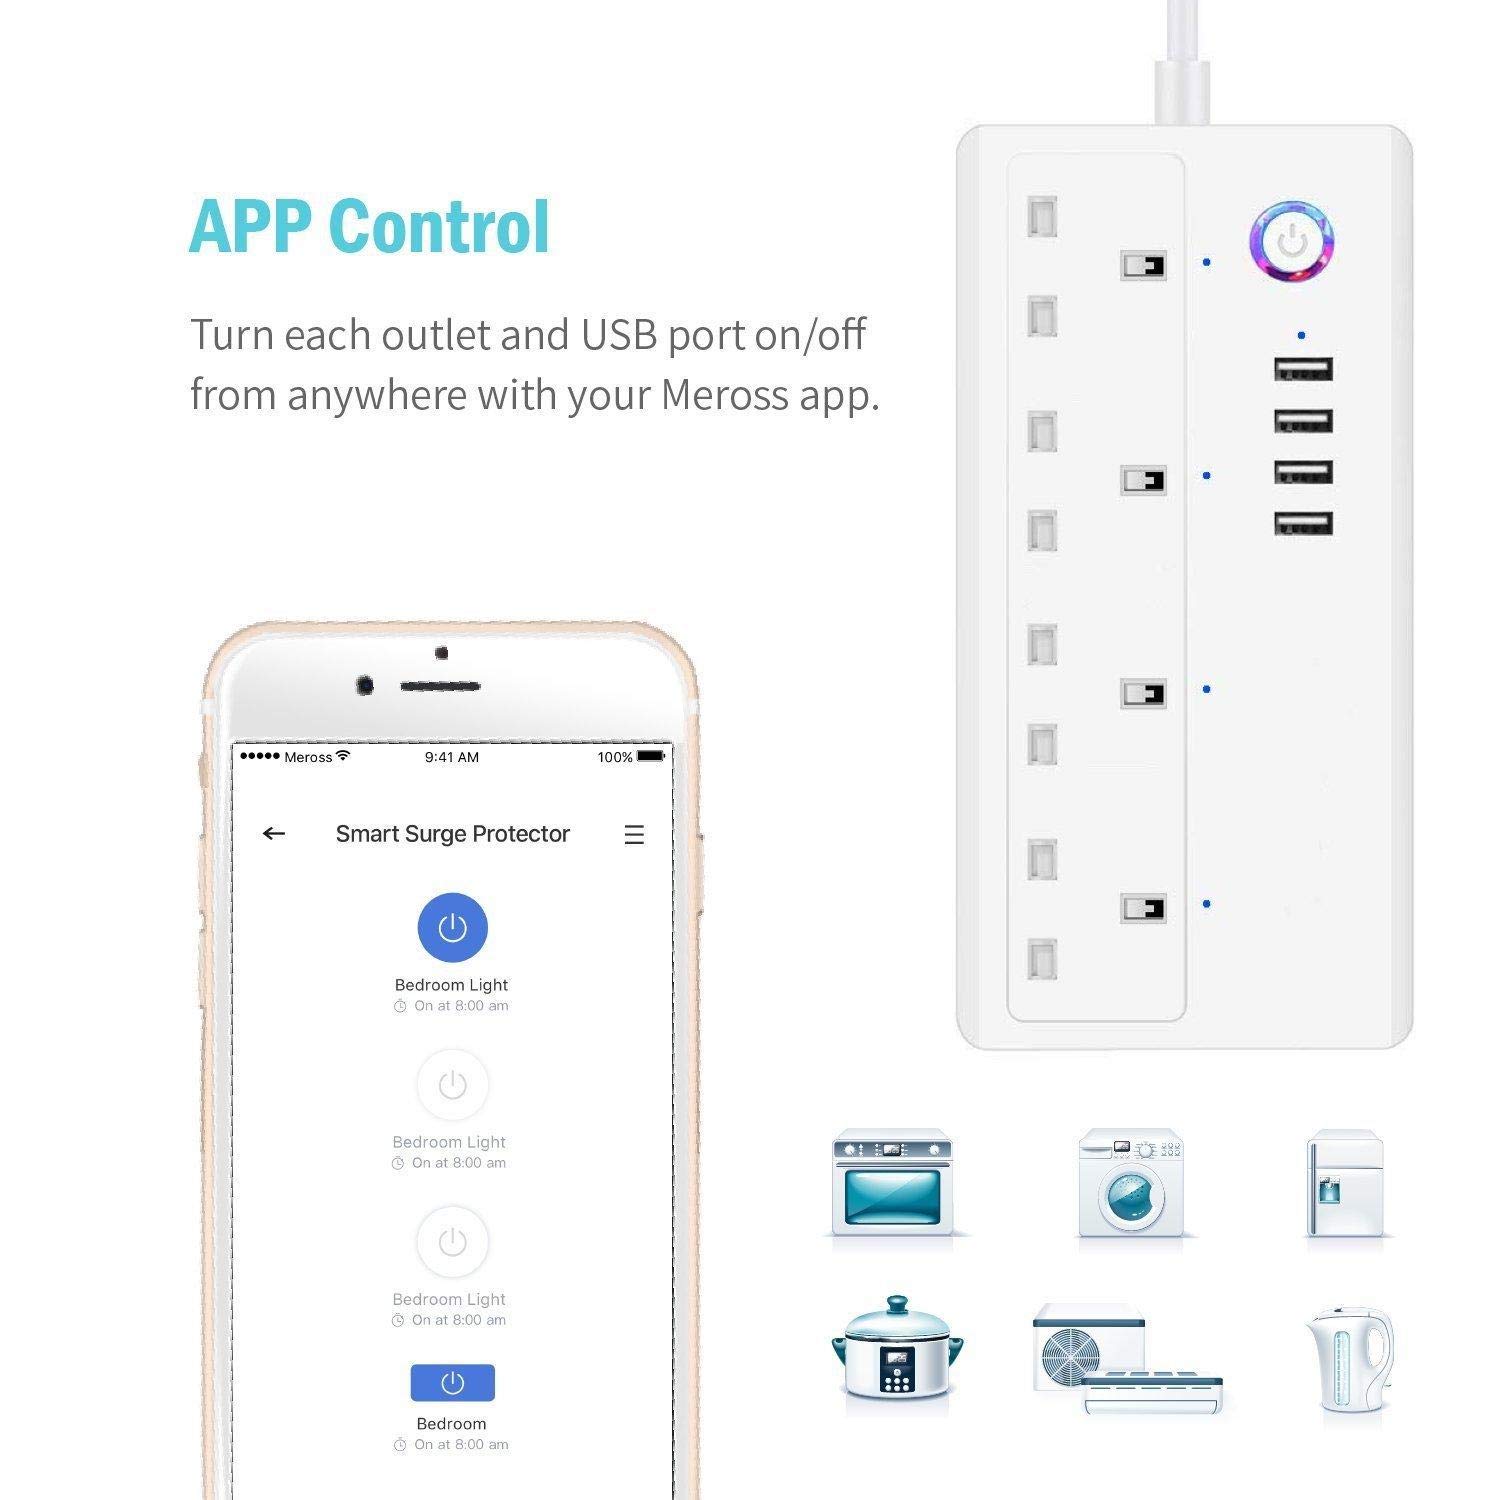 Smart Wifi Plug Extension iOS Android App Remote Control Power Socket Strip with 4 AC Plug Outlets